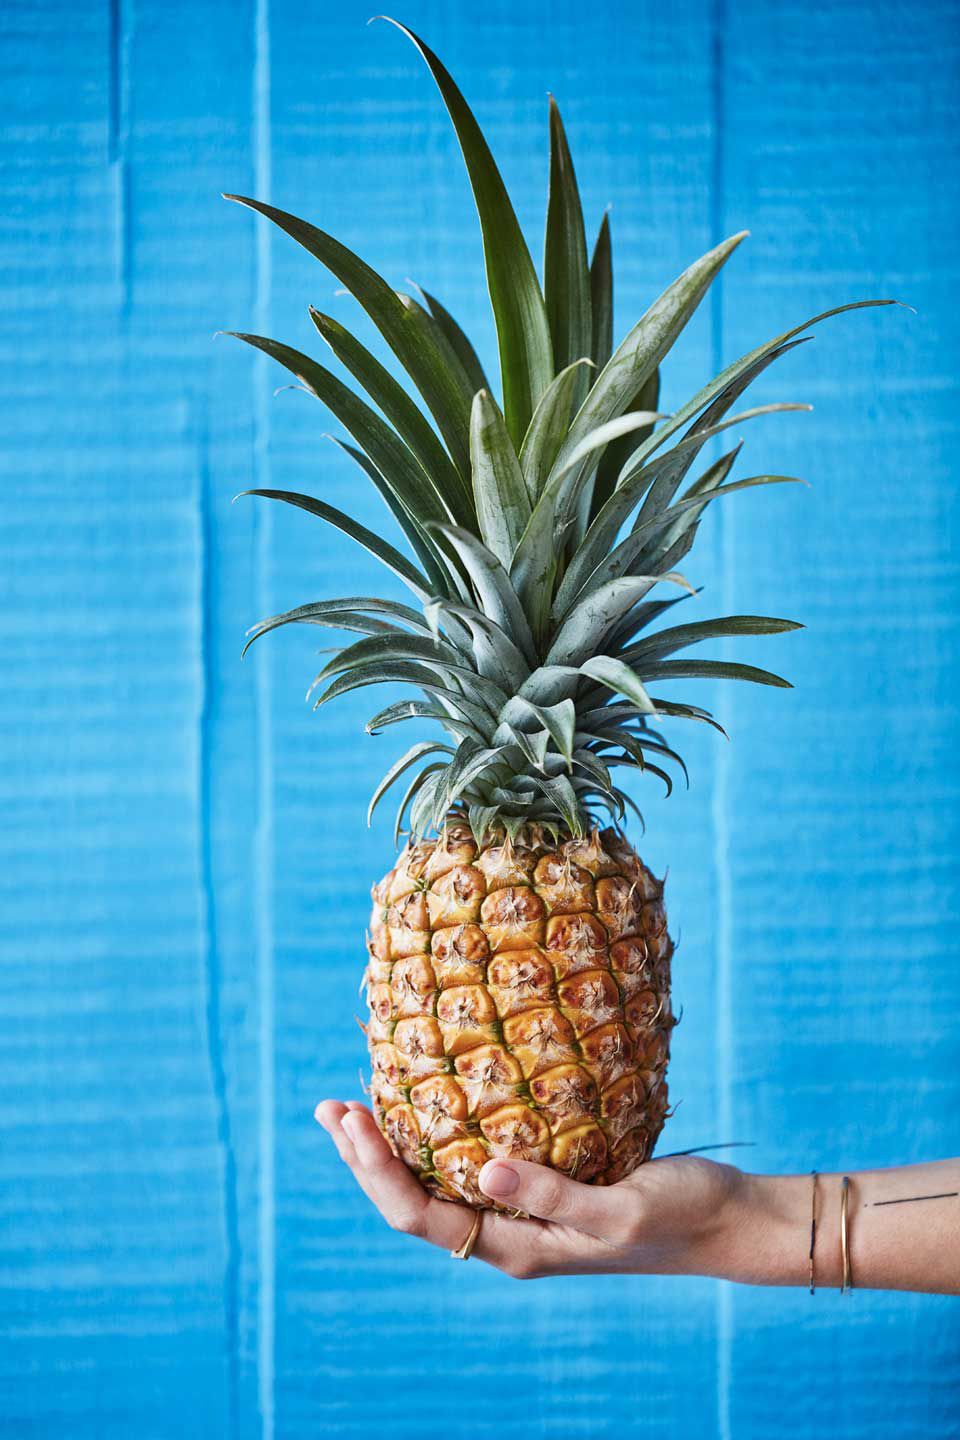 Pineapple on blue background